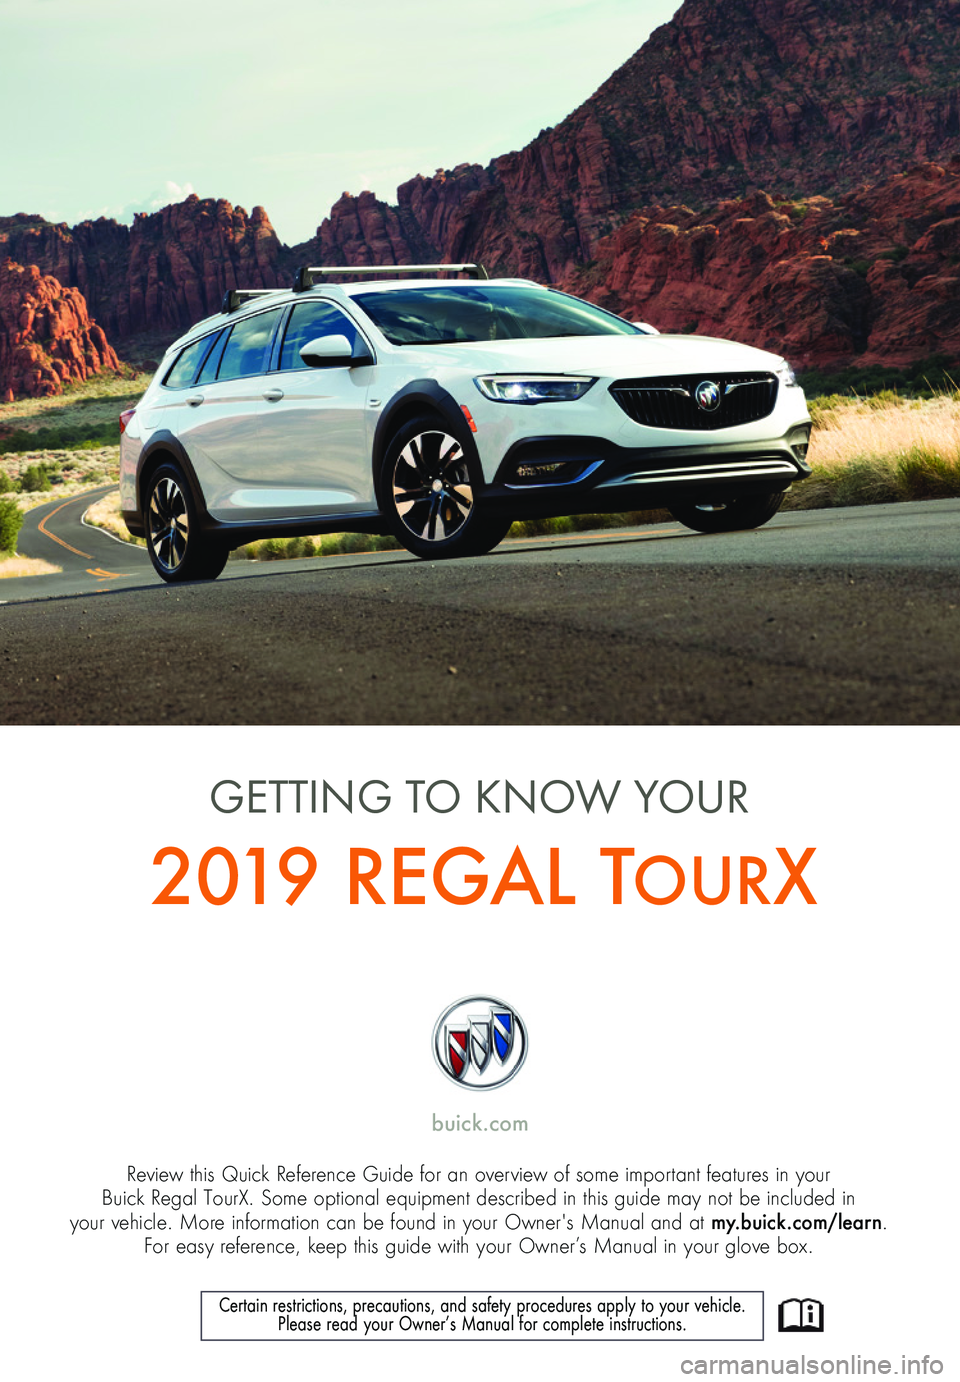 BUICK REGAL TOURX 2019  Get To Know Guide 1
Review this Quick Reference Guide for an overview of some important features in your  Buick Regal TourX. Some optional equipment described in this guide may not be included in  your vehicle. More in